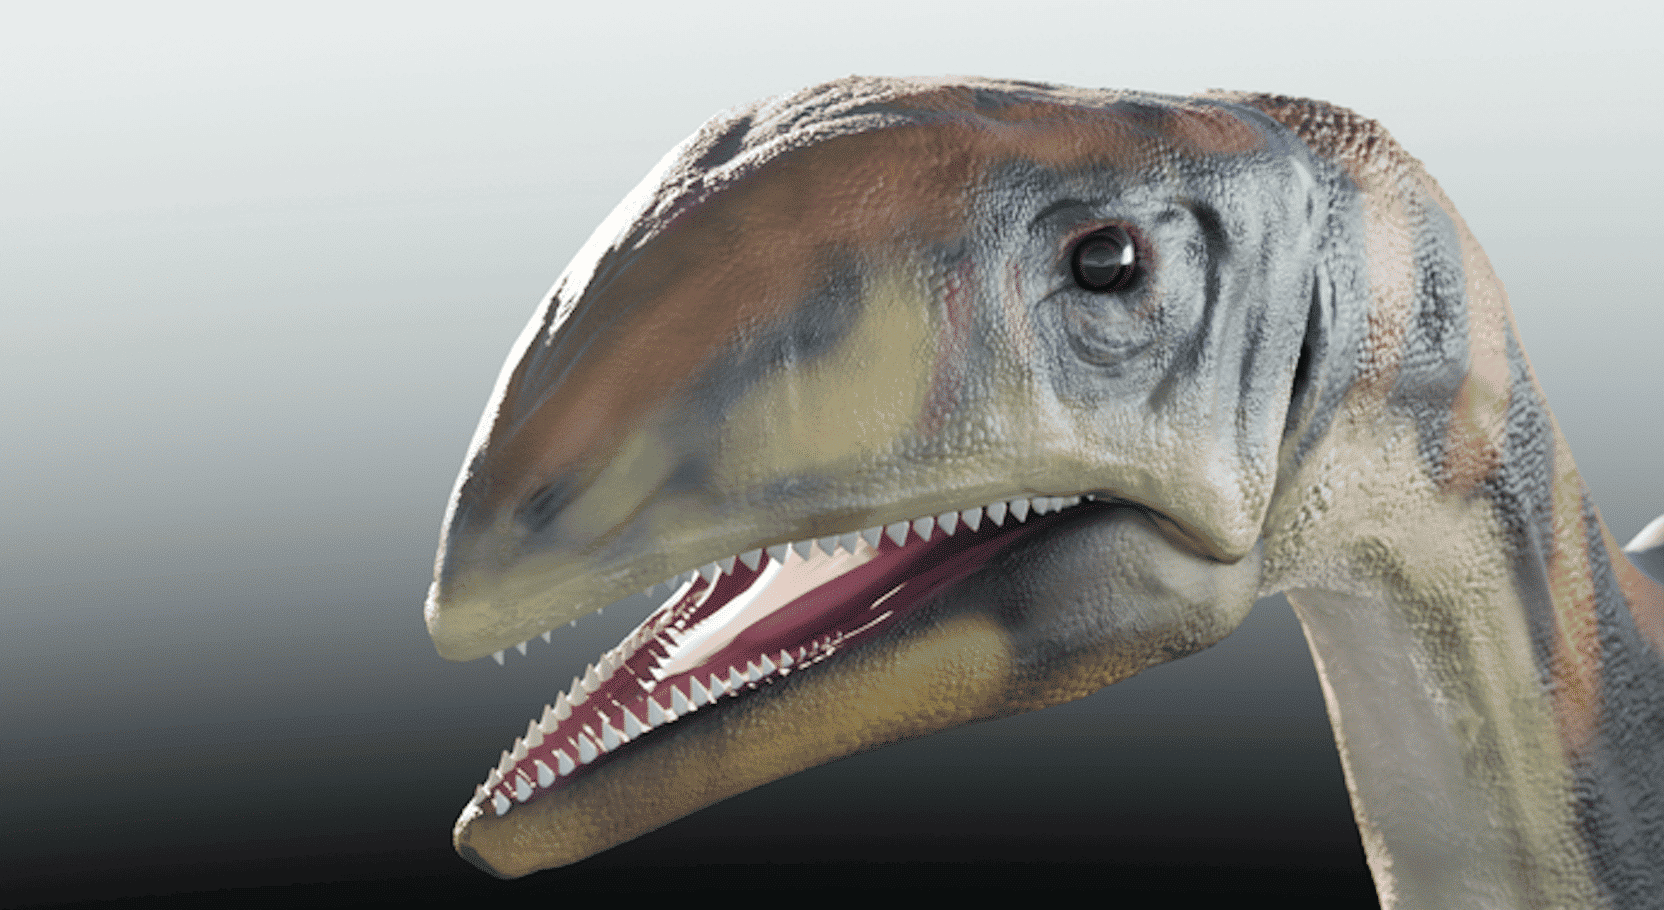 Living reconstruction of Issi saaneq, a newly discovered dinosaur that lived on Greenland 214 million years ago